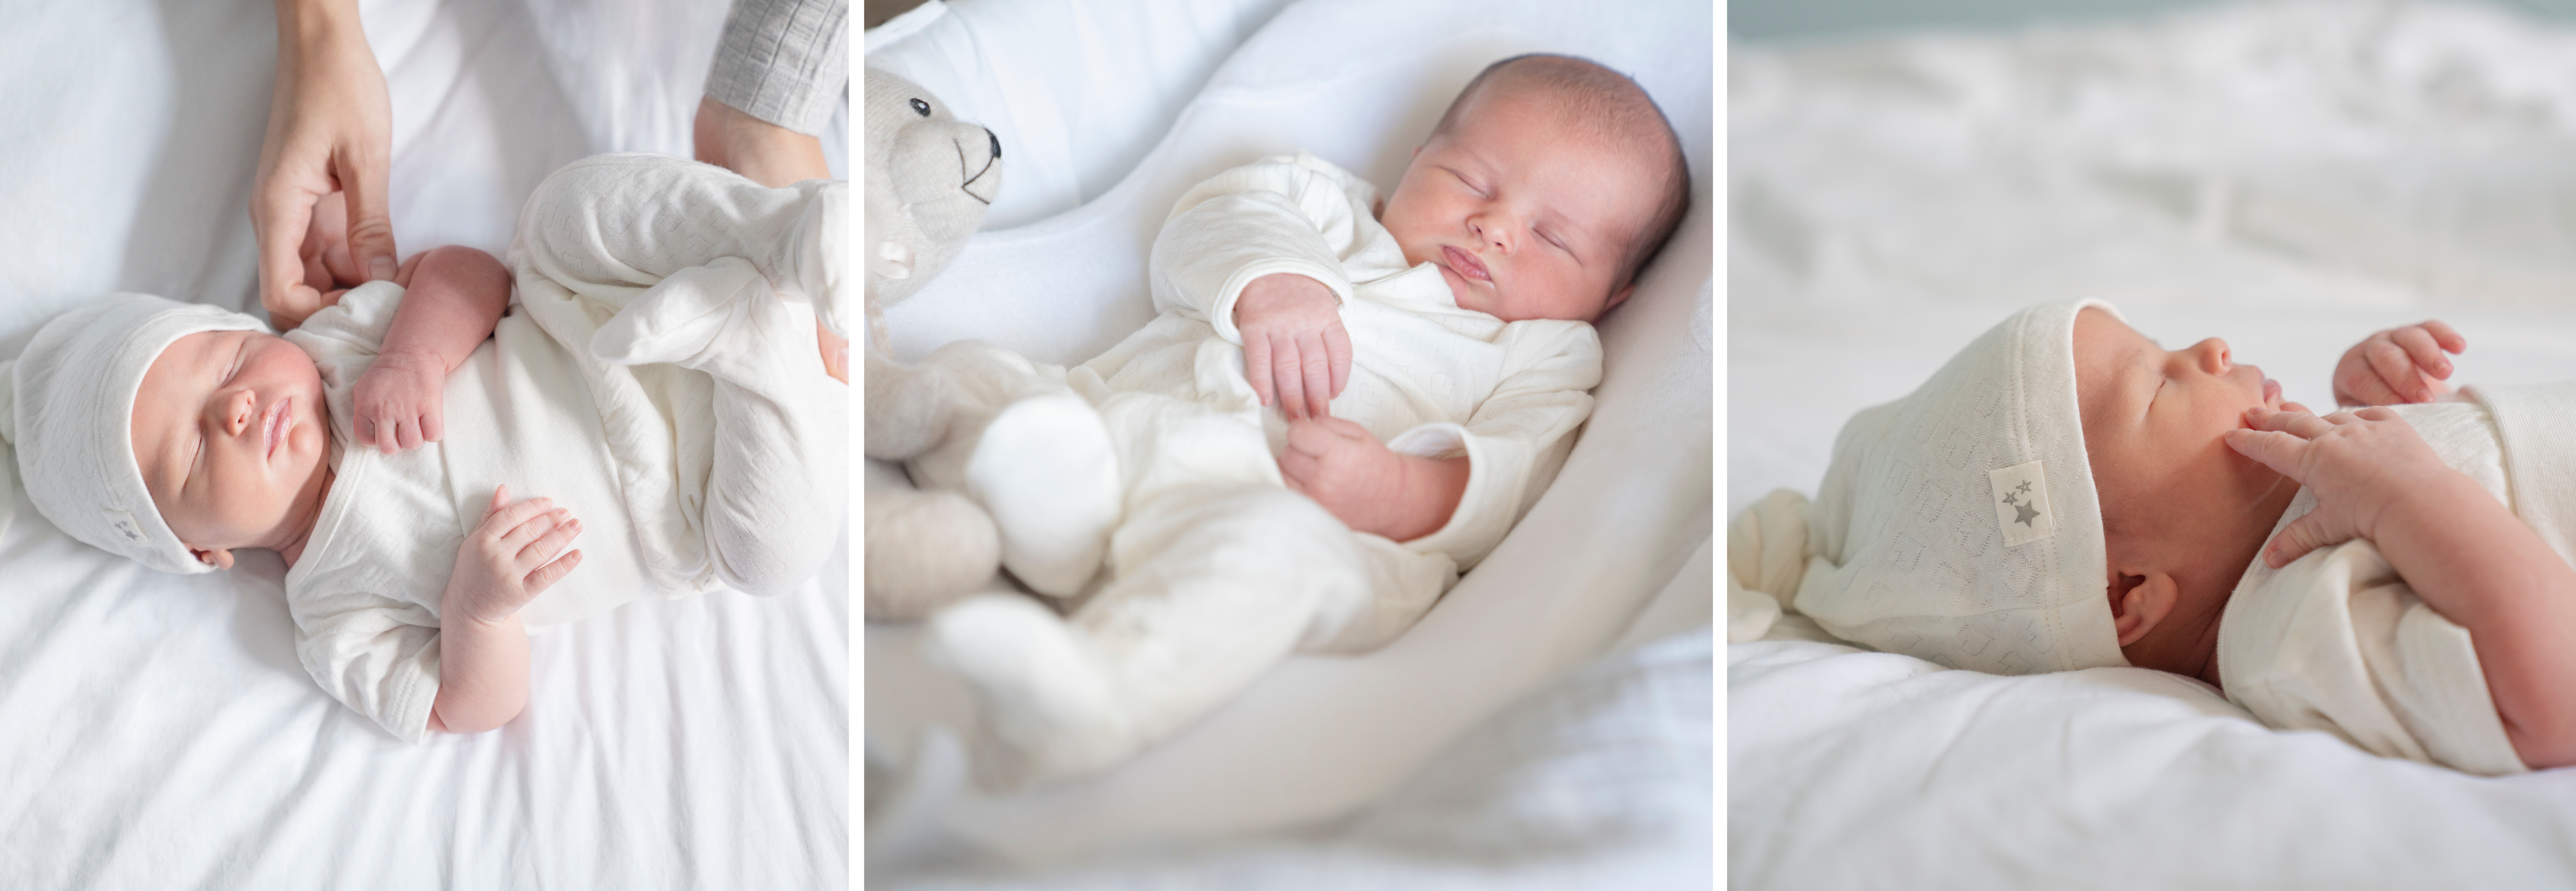 New baby gifts by Seraphine - organic cotton baby clothes